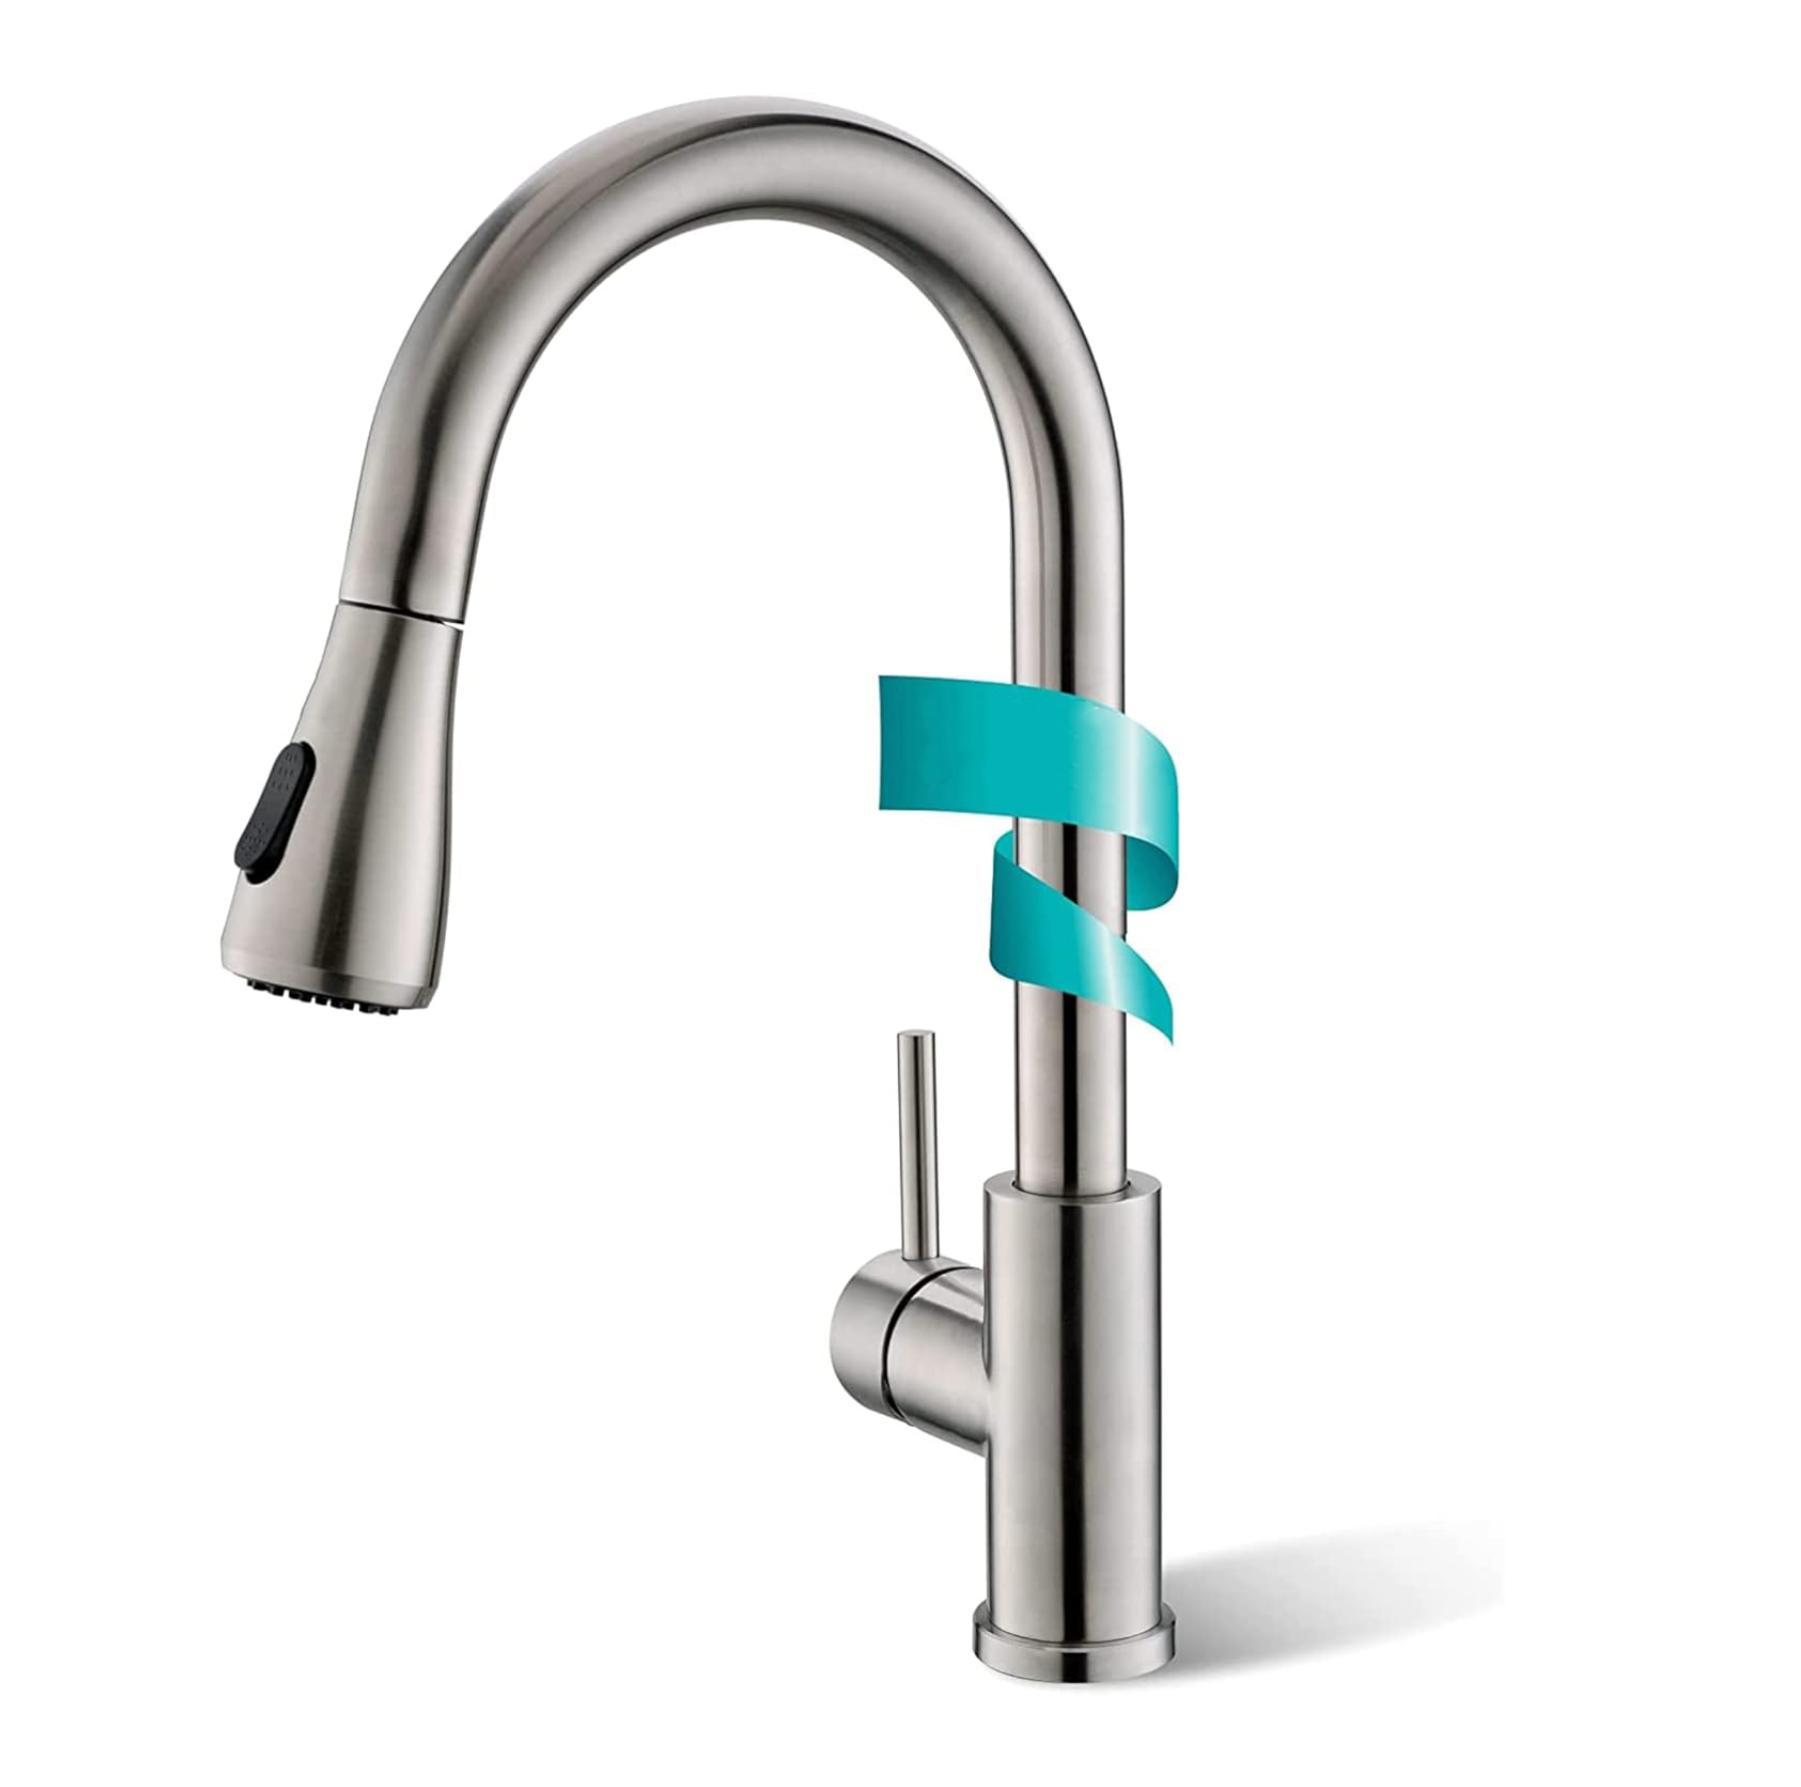 Fossa Pull-Out Kitchen Tap 360° Swivel Range Sink Mixer Tap Single Lever Mixer Tap for Kitchen Sink Fossa Home